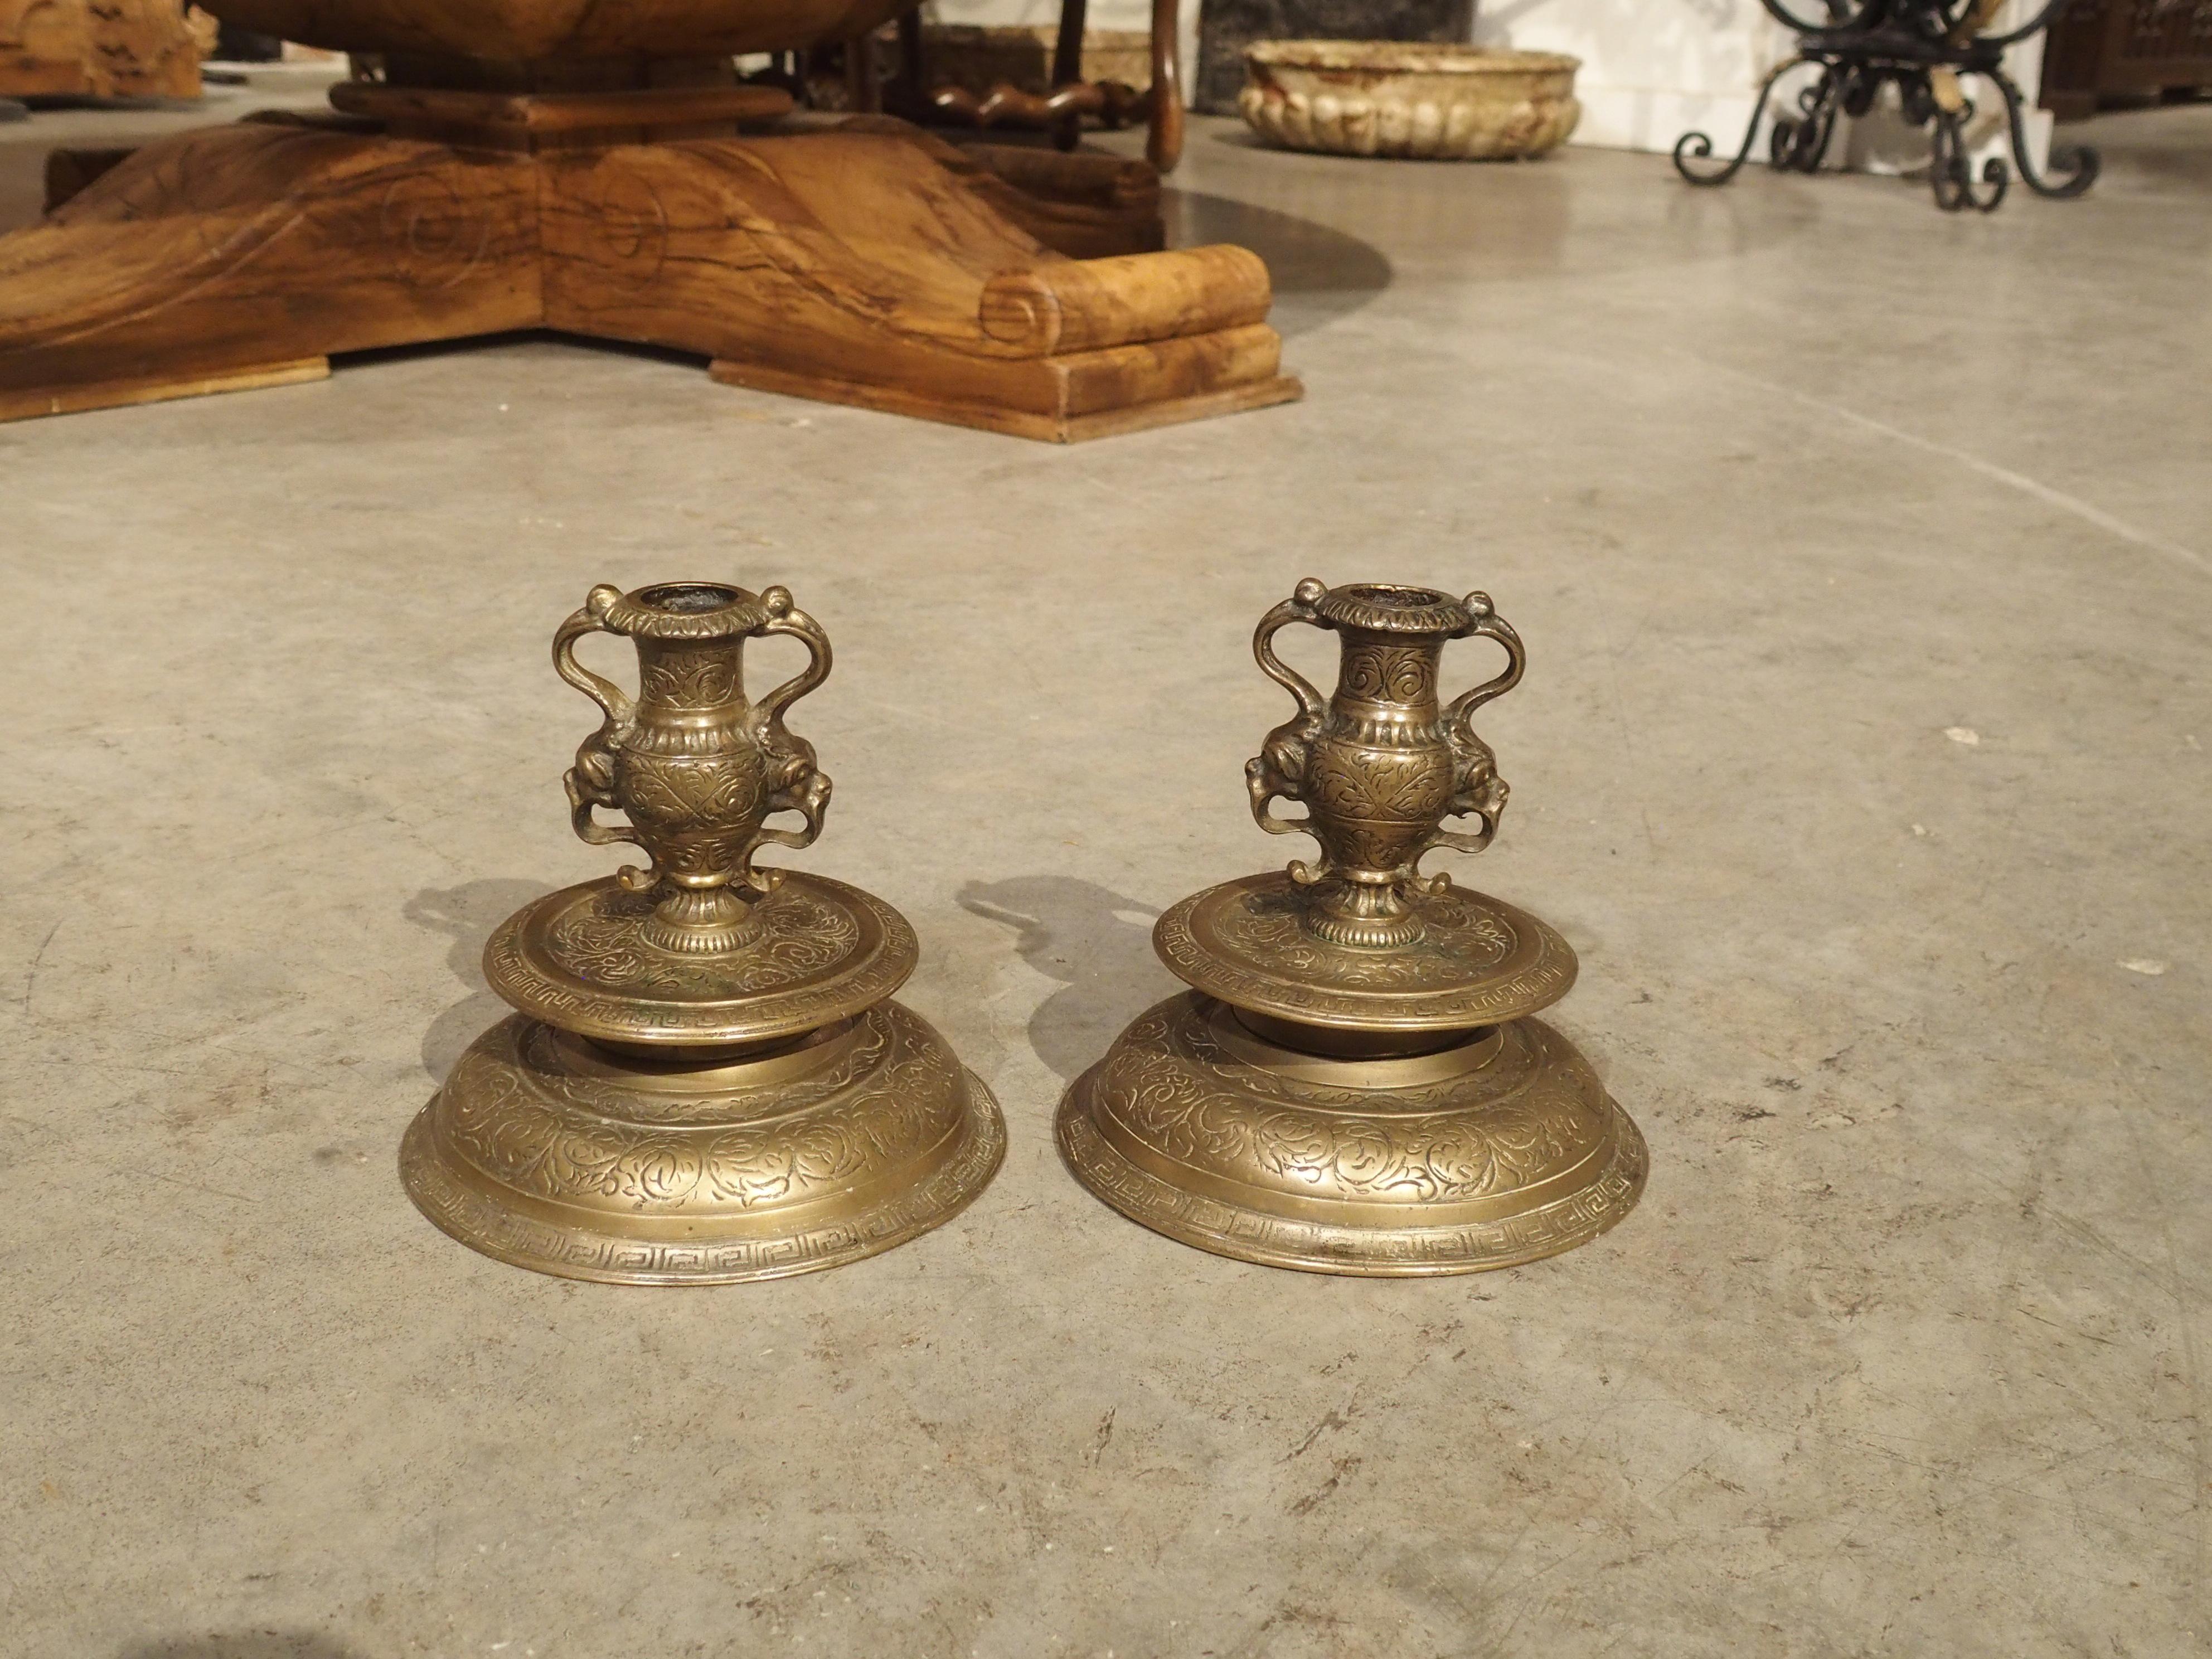 This pair of small 19th century bronze candlesticks (“bougeoirs” in French) was crafted in the Renaissance style.

The circular molded base has two rings of Greek key – one on the lower base and a second on the elevated bobeche. Greek key is a